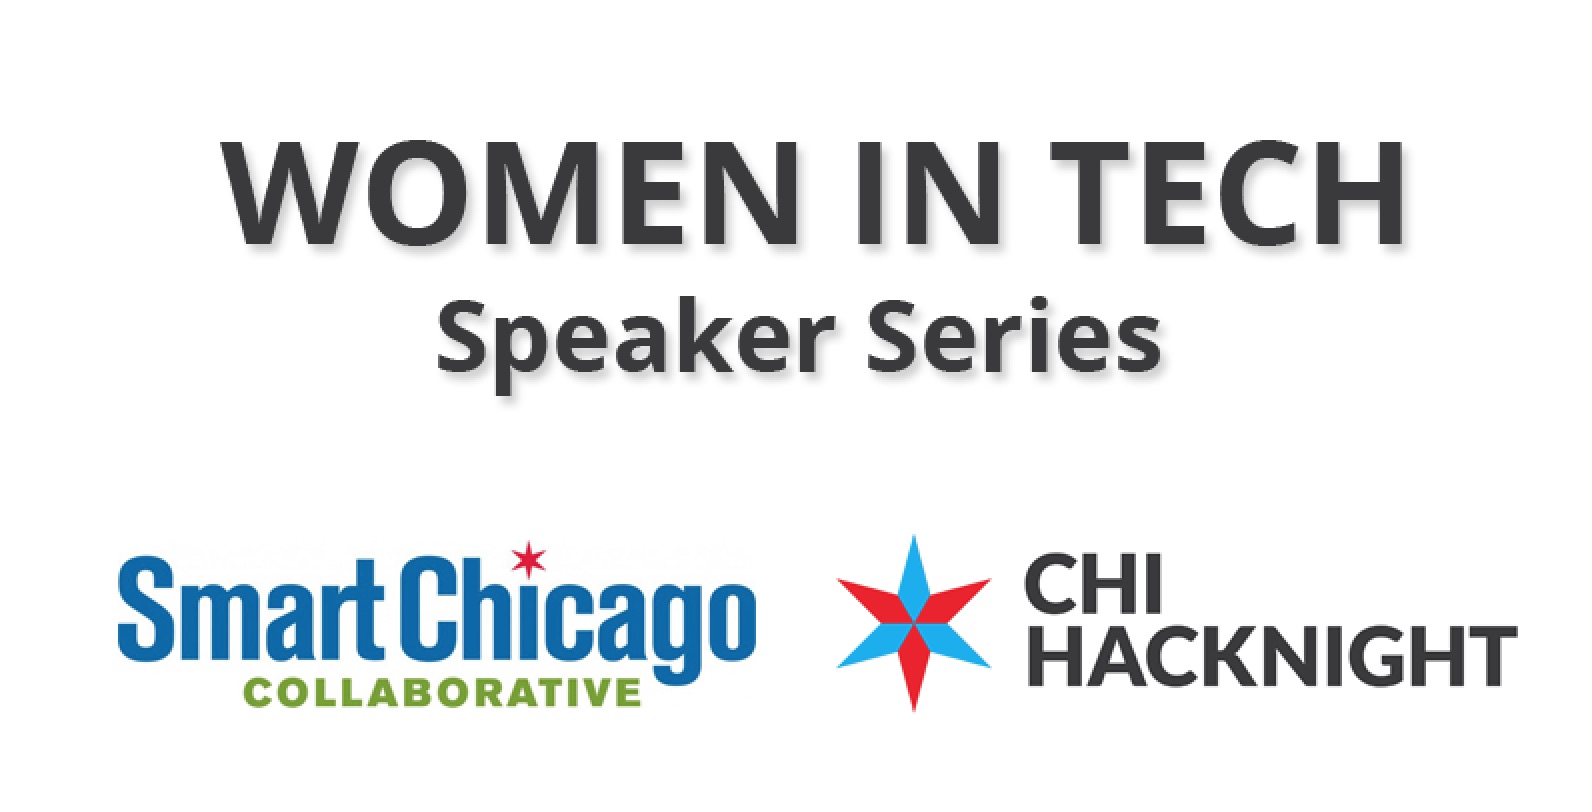 Smart Chicago Collaboarative and Chi Hack Night present: the Women In Tech Speaker Series